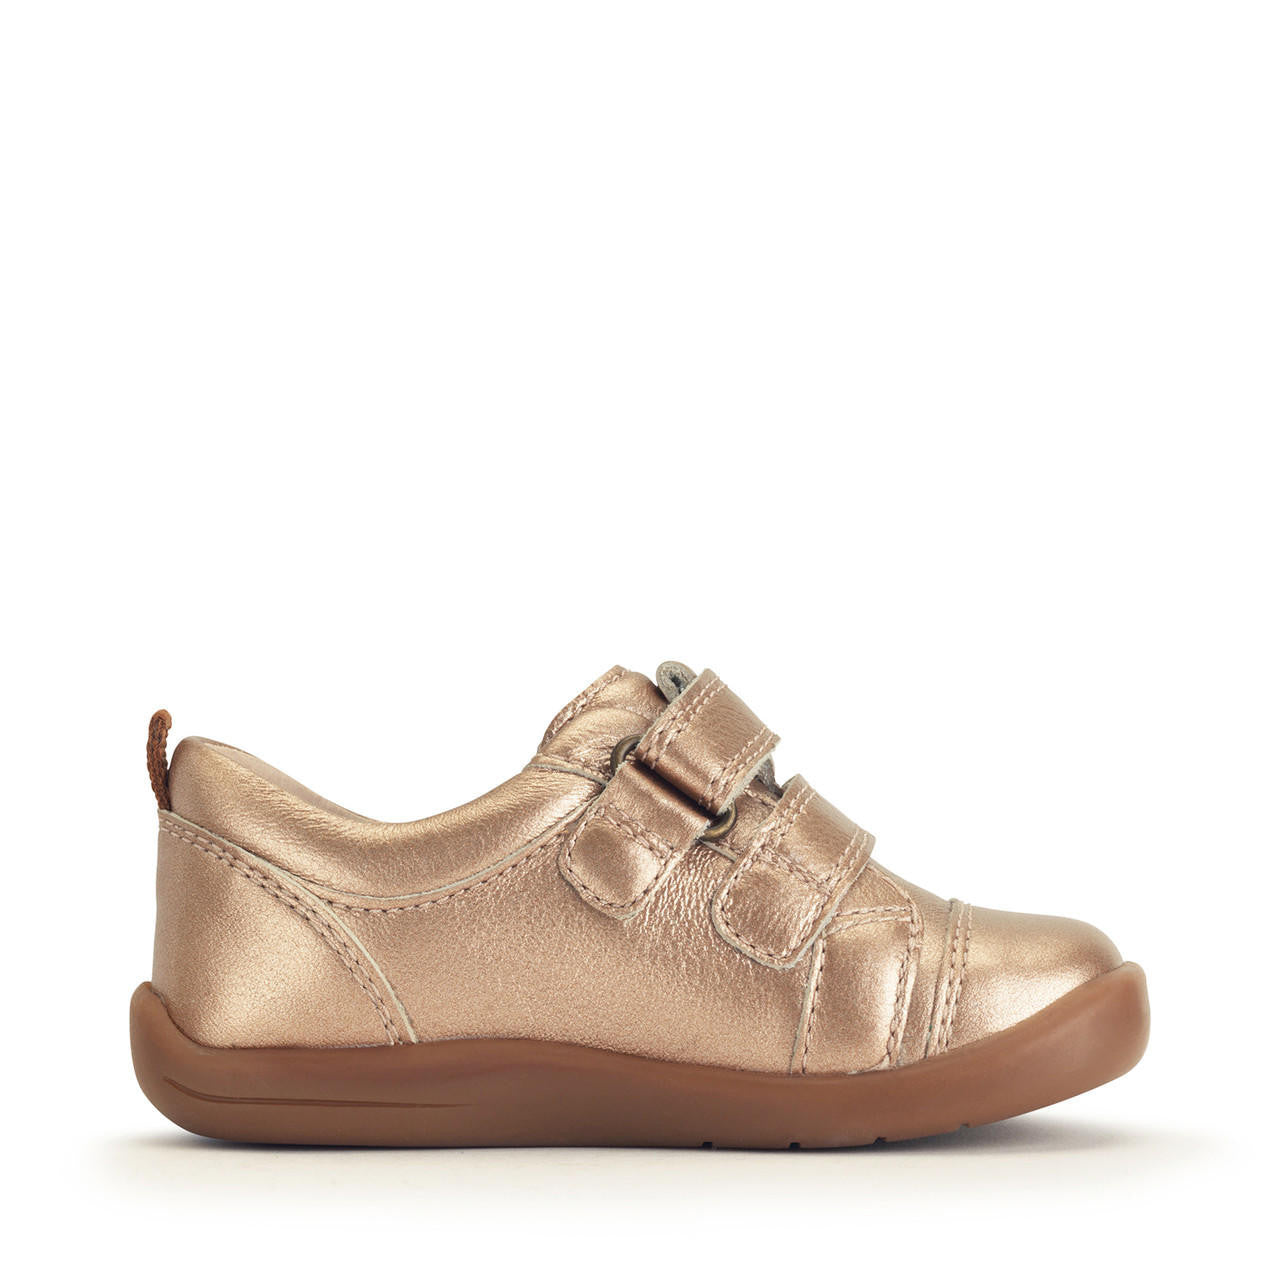 A girls casual shoe by Start-Rite, style Maze, in rose gold leather. Double velcro fastening. Left side view.